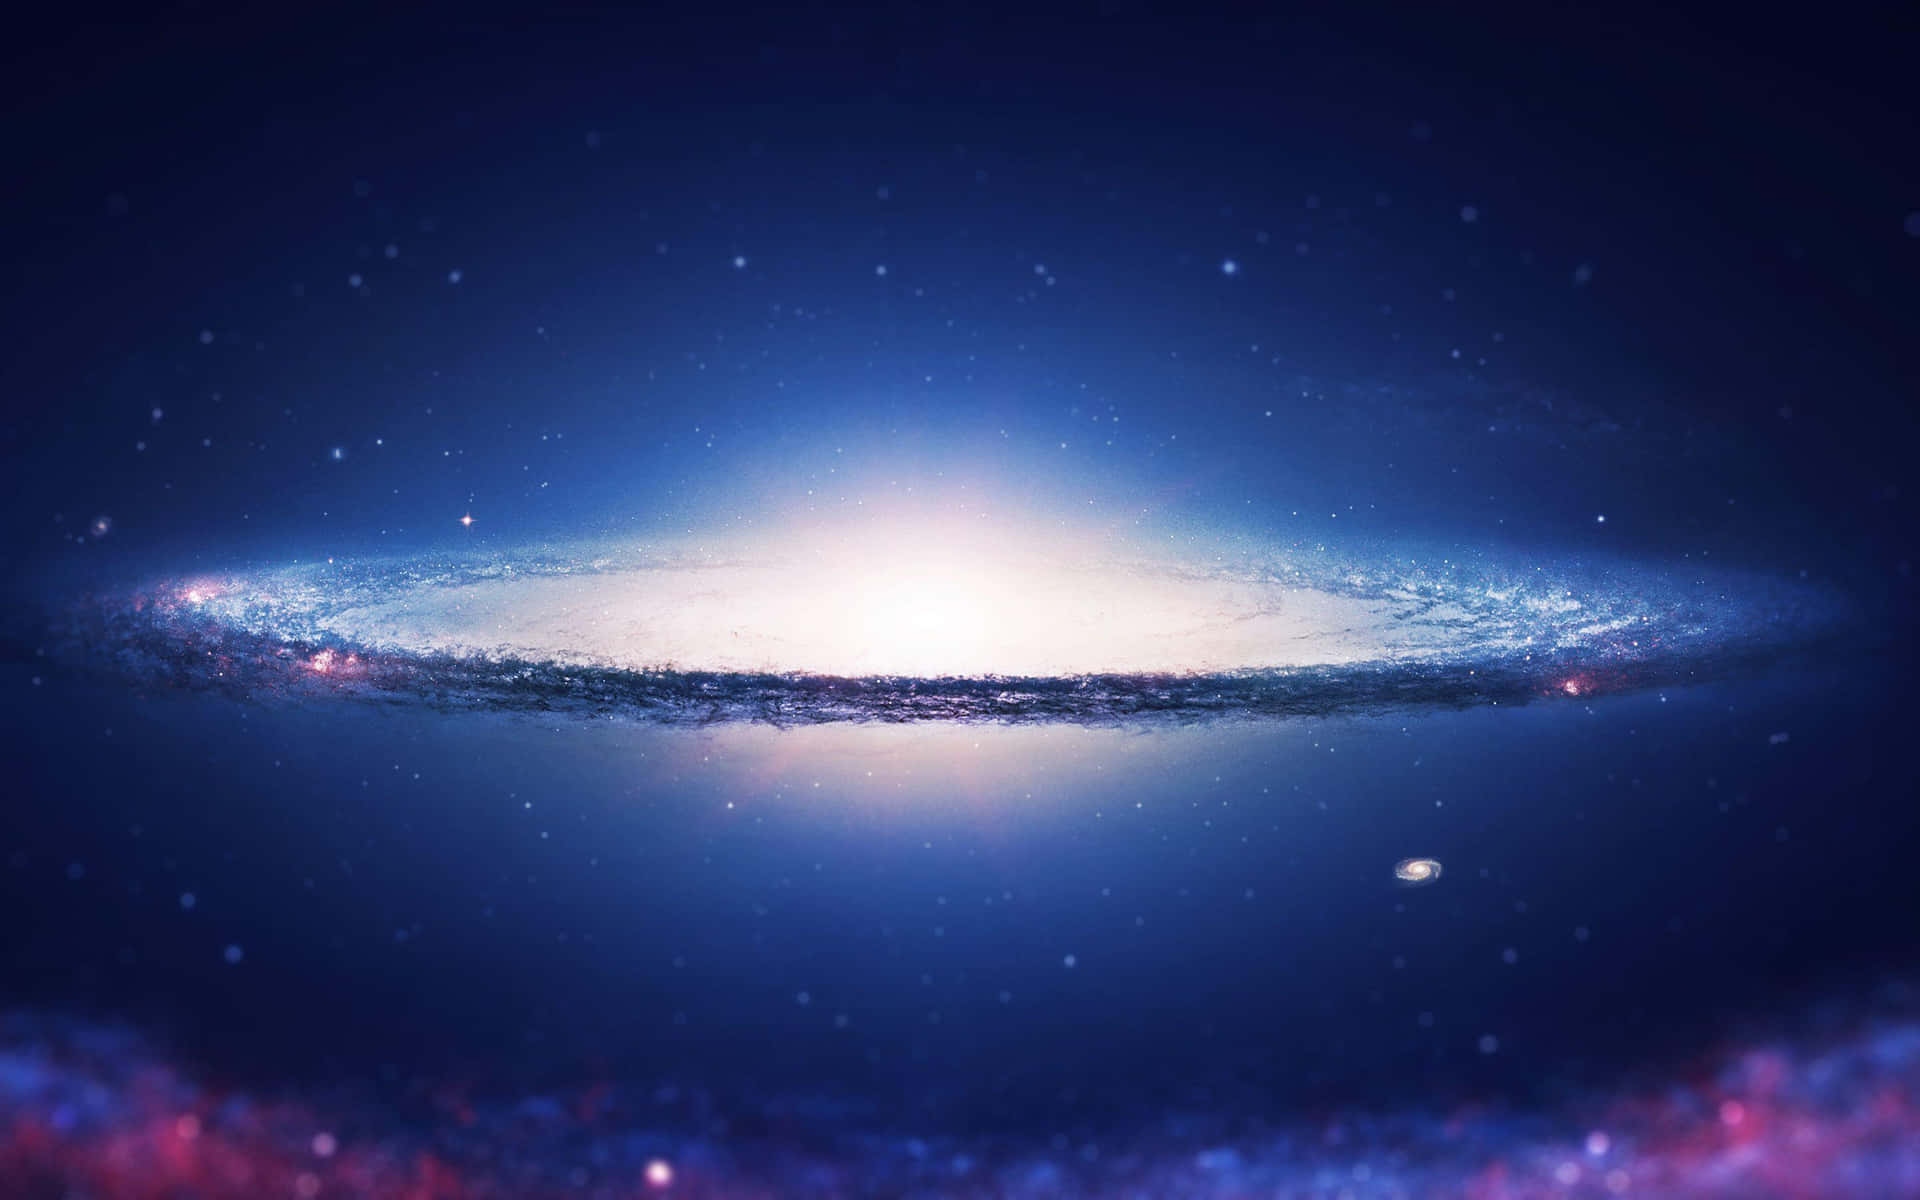 Caption: Majestic Spiral Galaxy in the Cosmos Wallpaper